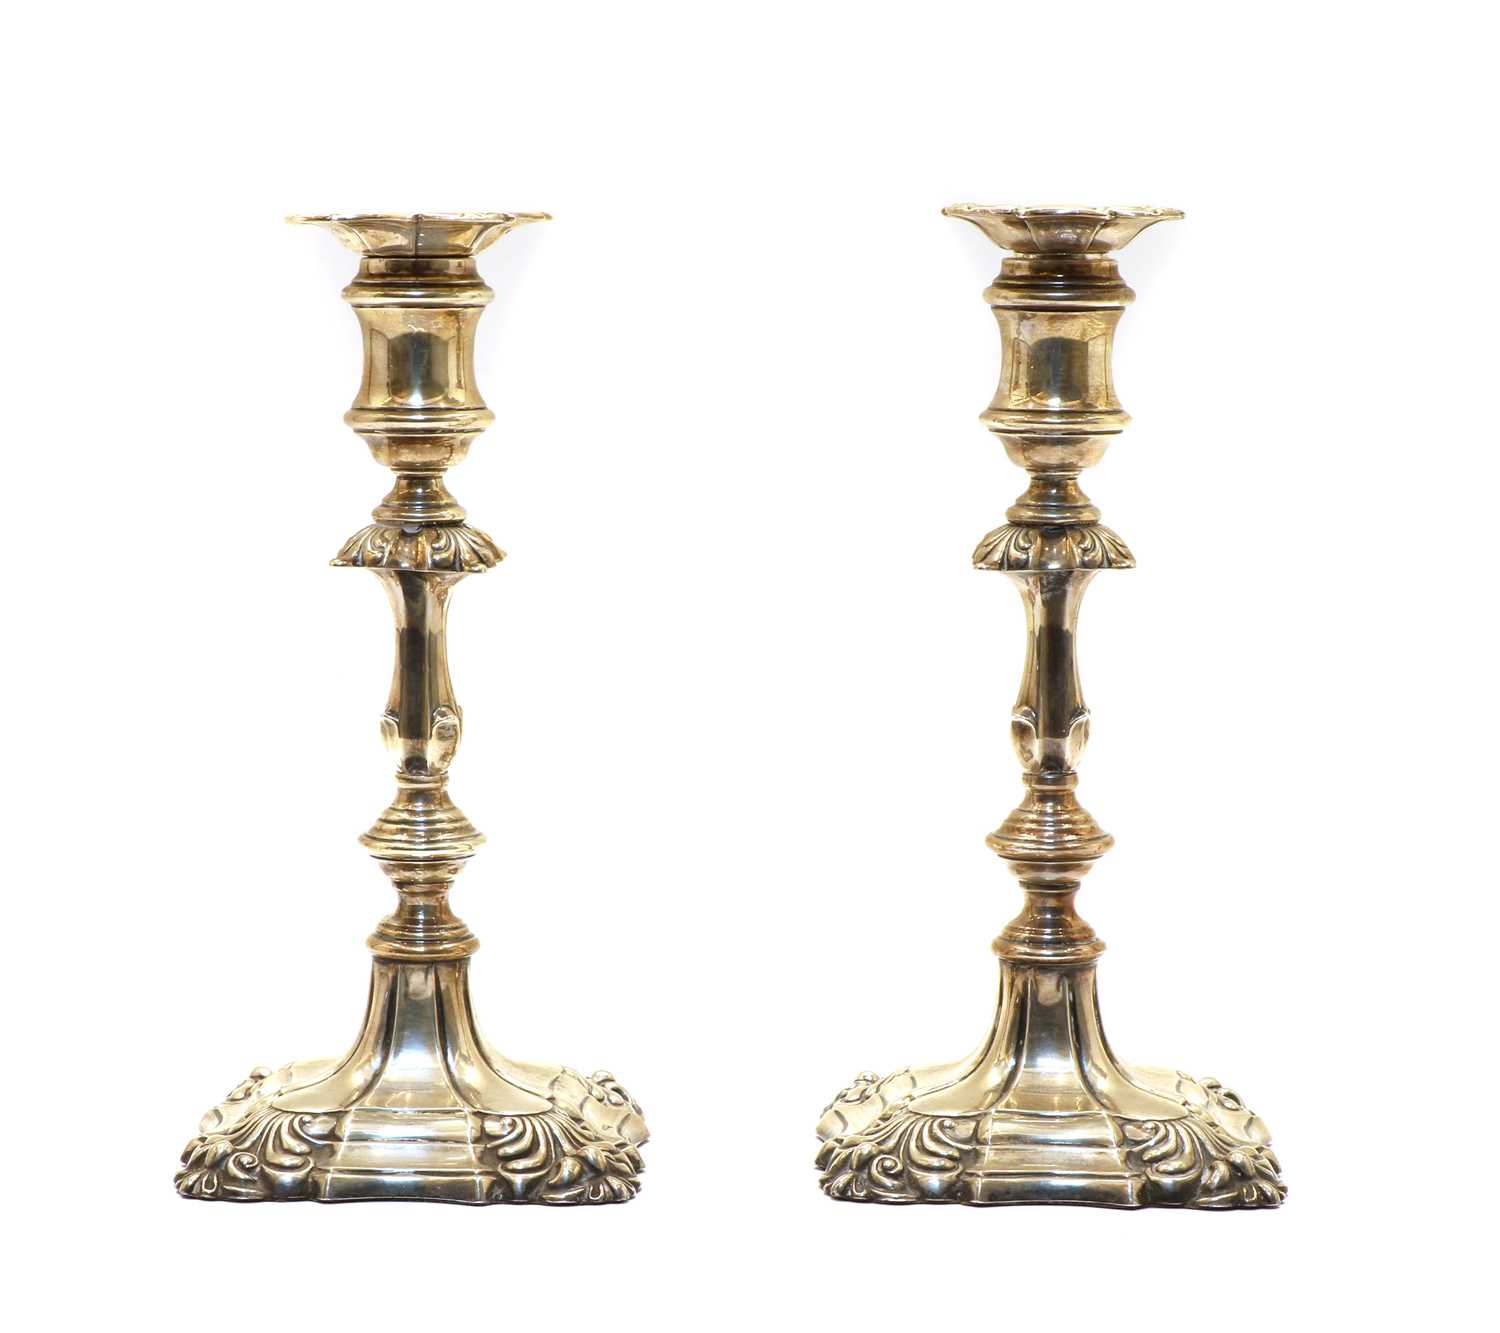 Lot 64 - A pair of Queen Anne style candlesticks by Ellis & Co